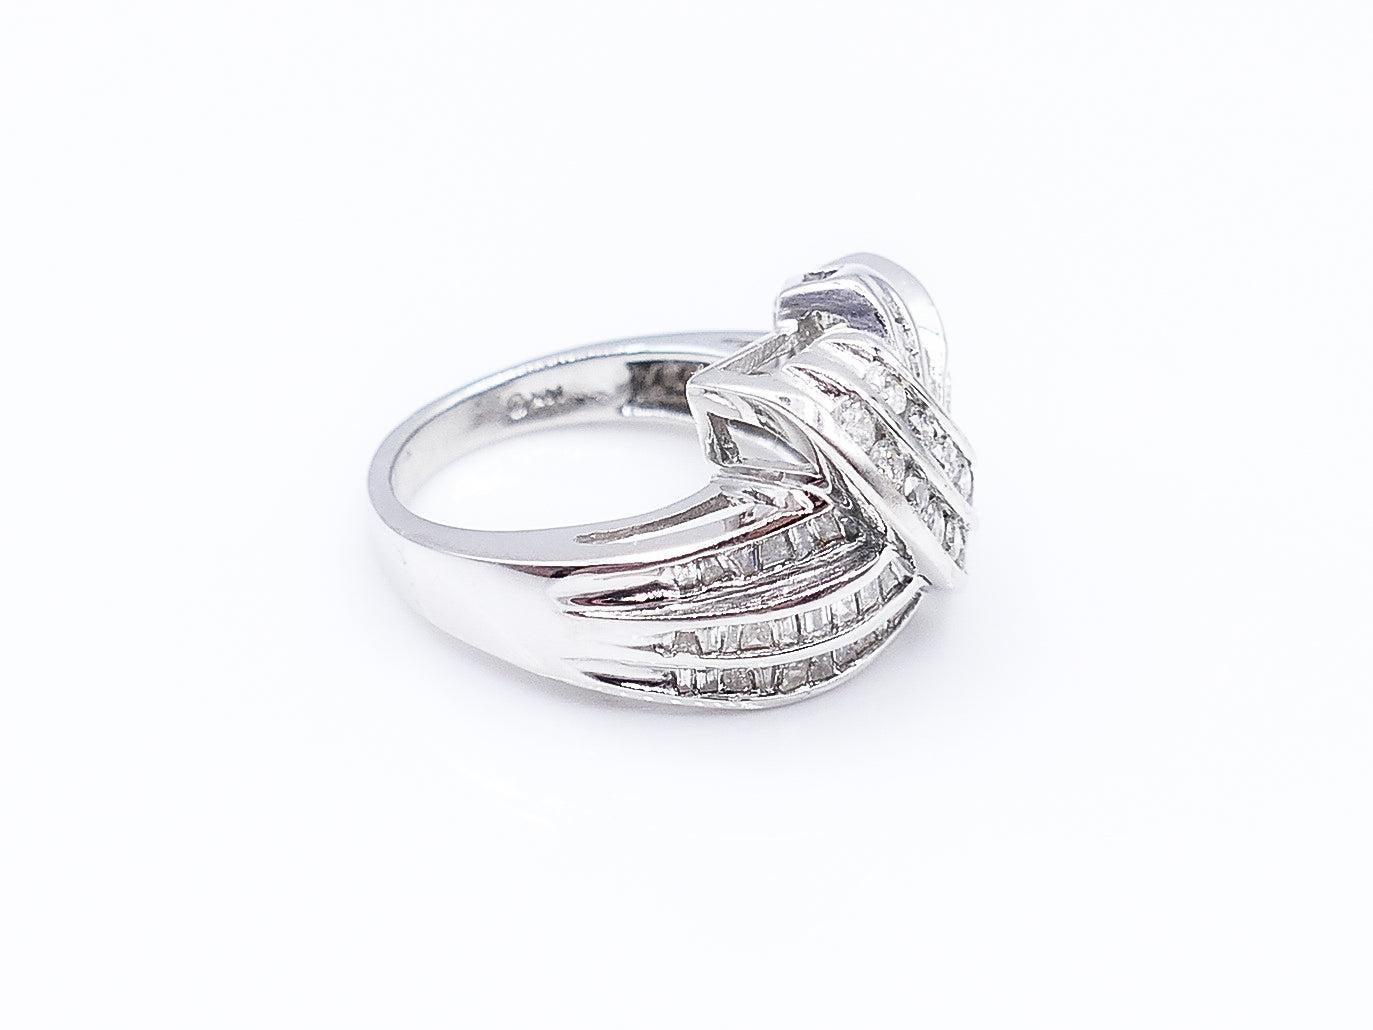 This beautiful asymmetrical ring is composed of 14 Karat White Gold and 59 Diamonds that weigh in at 2 Carats total. Two rows of round, channel-set Diamonds artfully overlap three rows of baguette Diamonds. 

7 g

Size 7